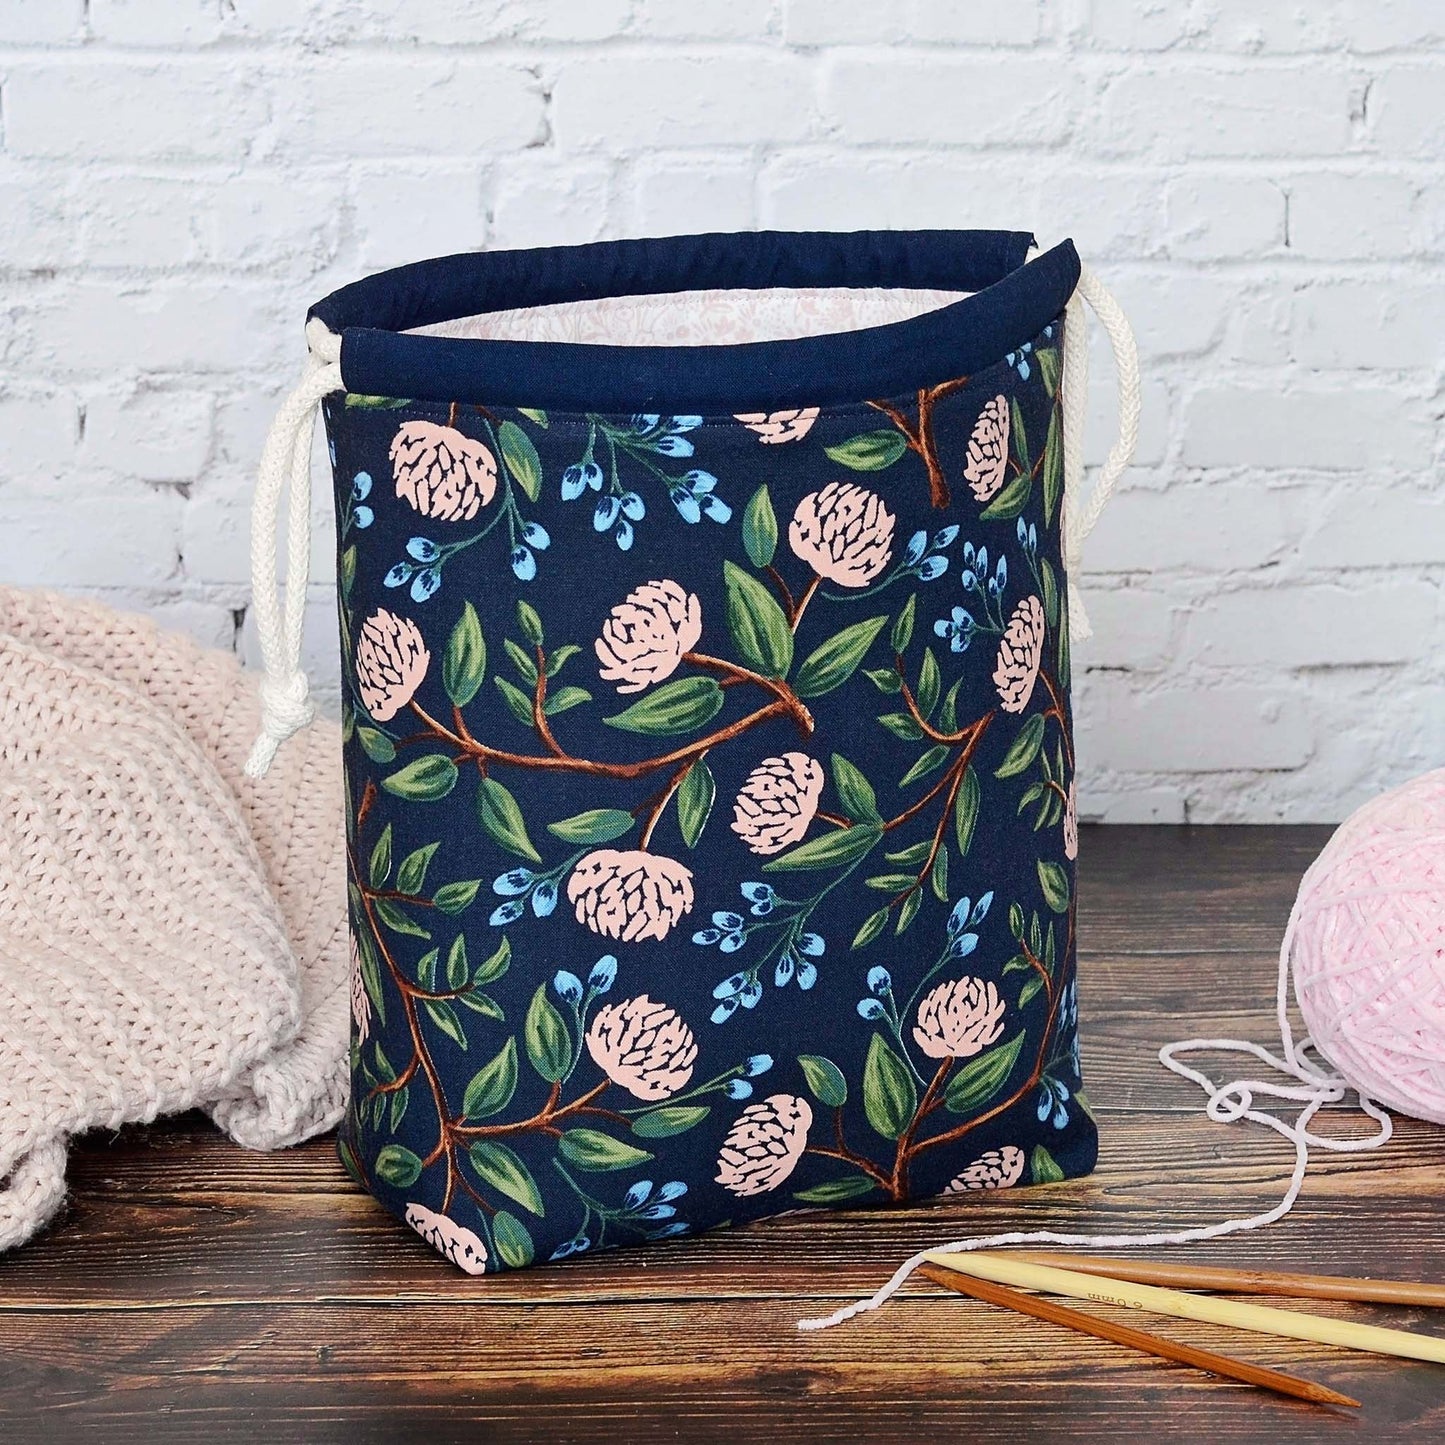 Navy floral drawstring project bag in Rifle Paper Co Peonies cotton.  Made in Canada by Yellow Petal Handmade.